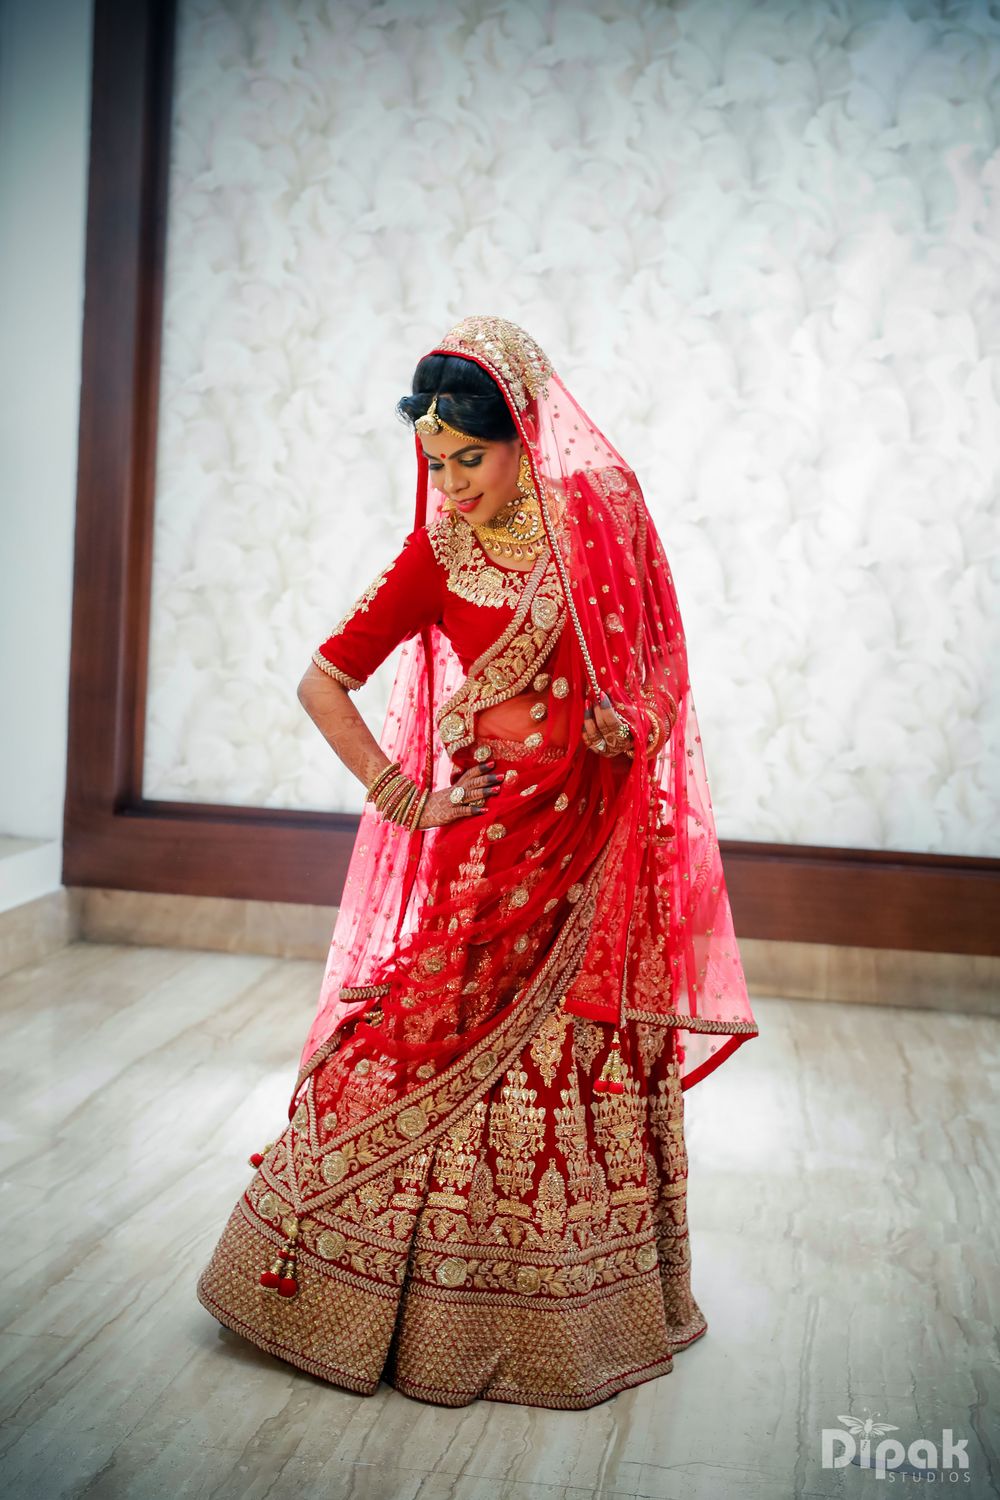 Photo of Bride Posing in Bright Red and Gold Bridal Lehenga